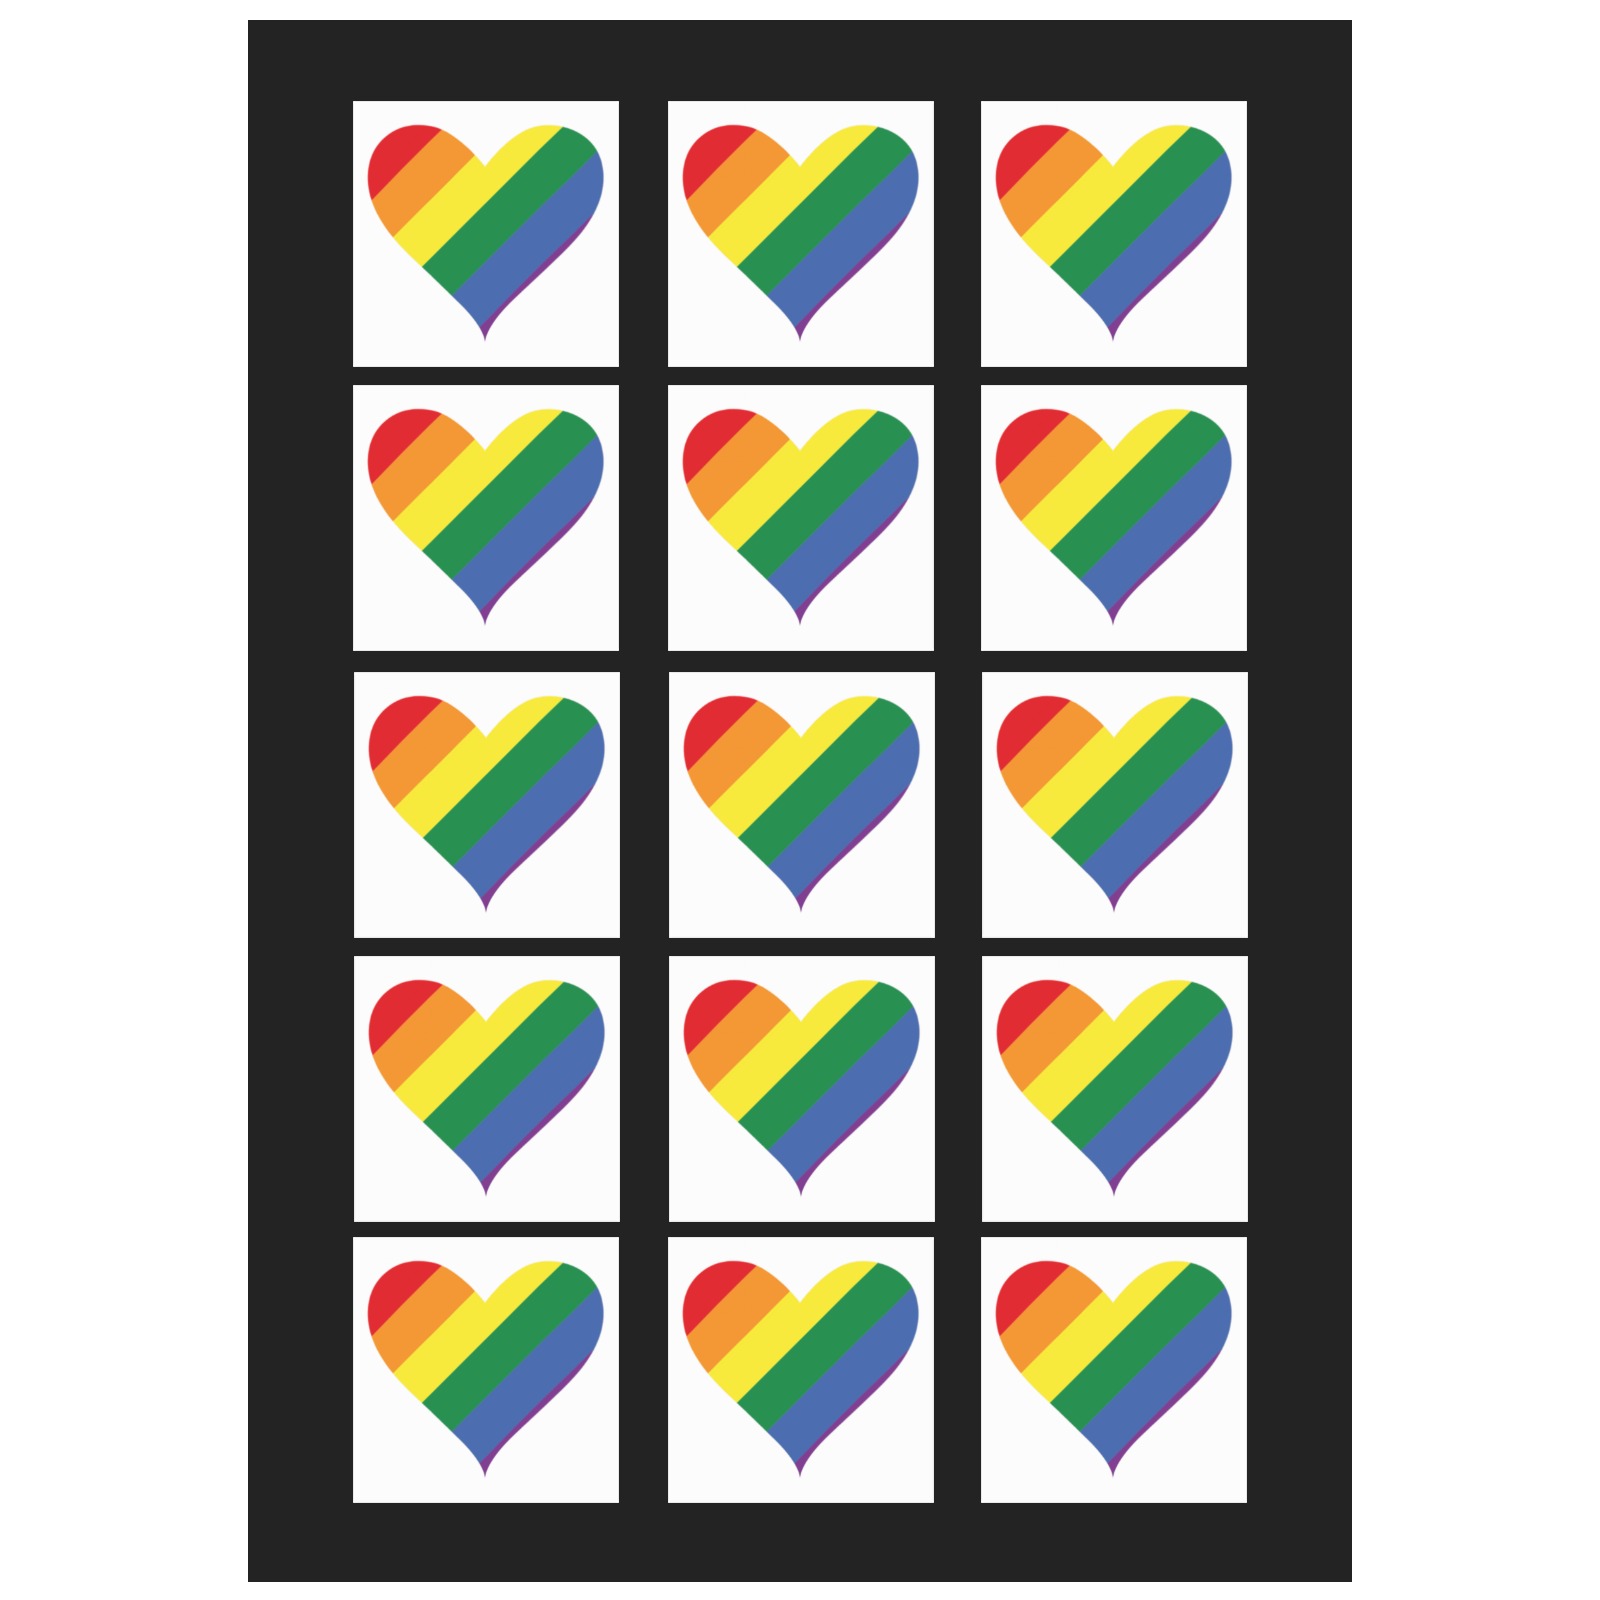 Gay Pride Heart - Courtesy of Pnghut Personalized Temporary Tattoo (15 Pieces)